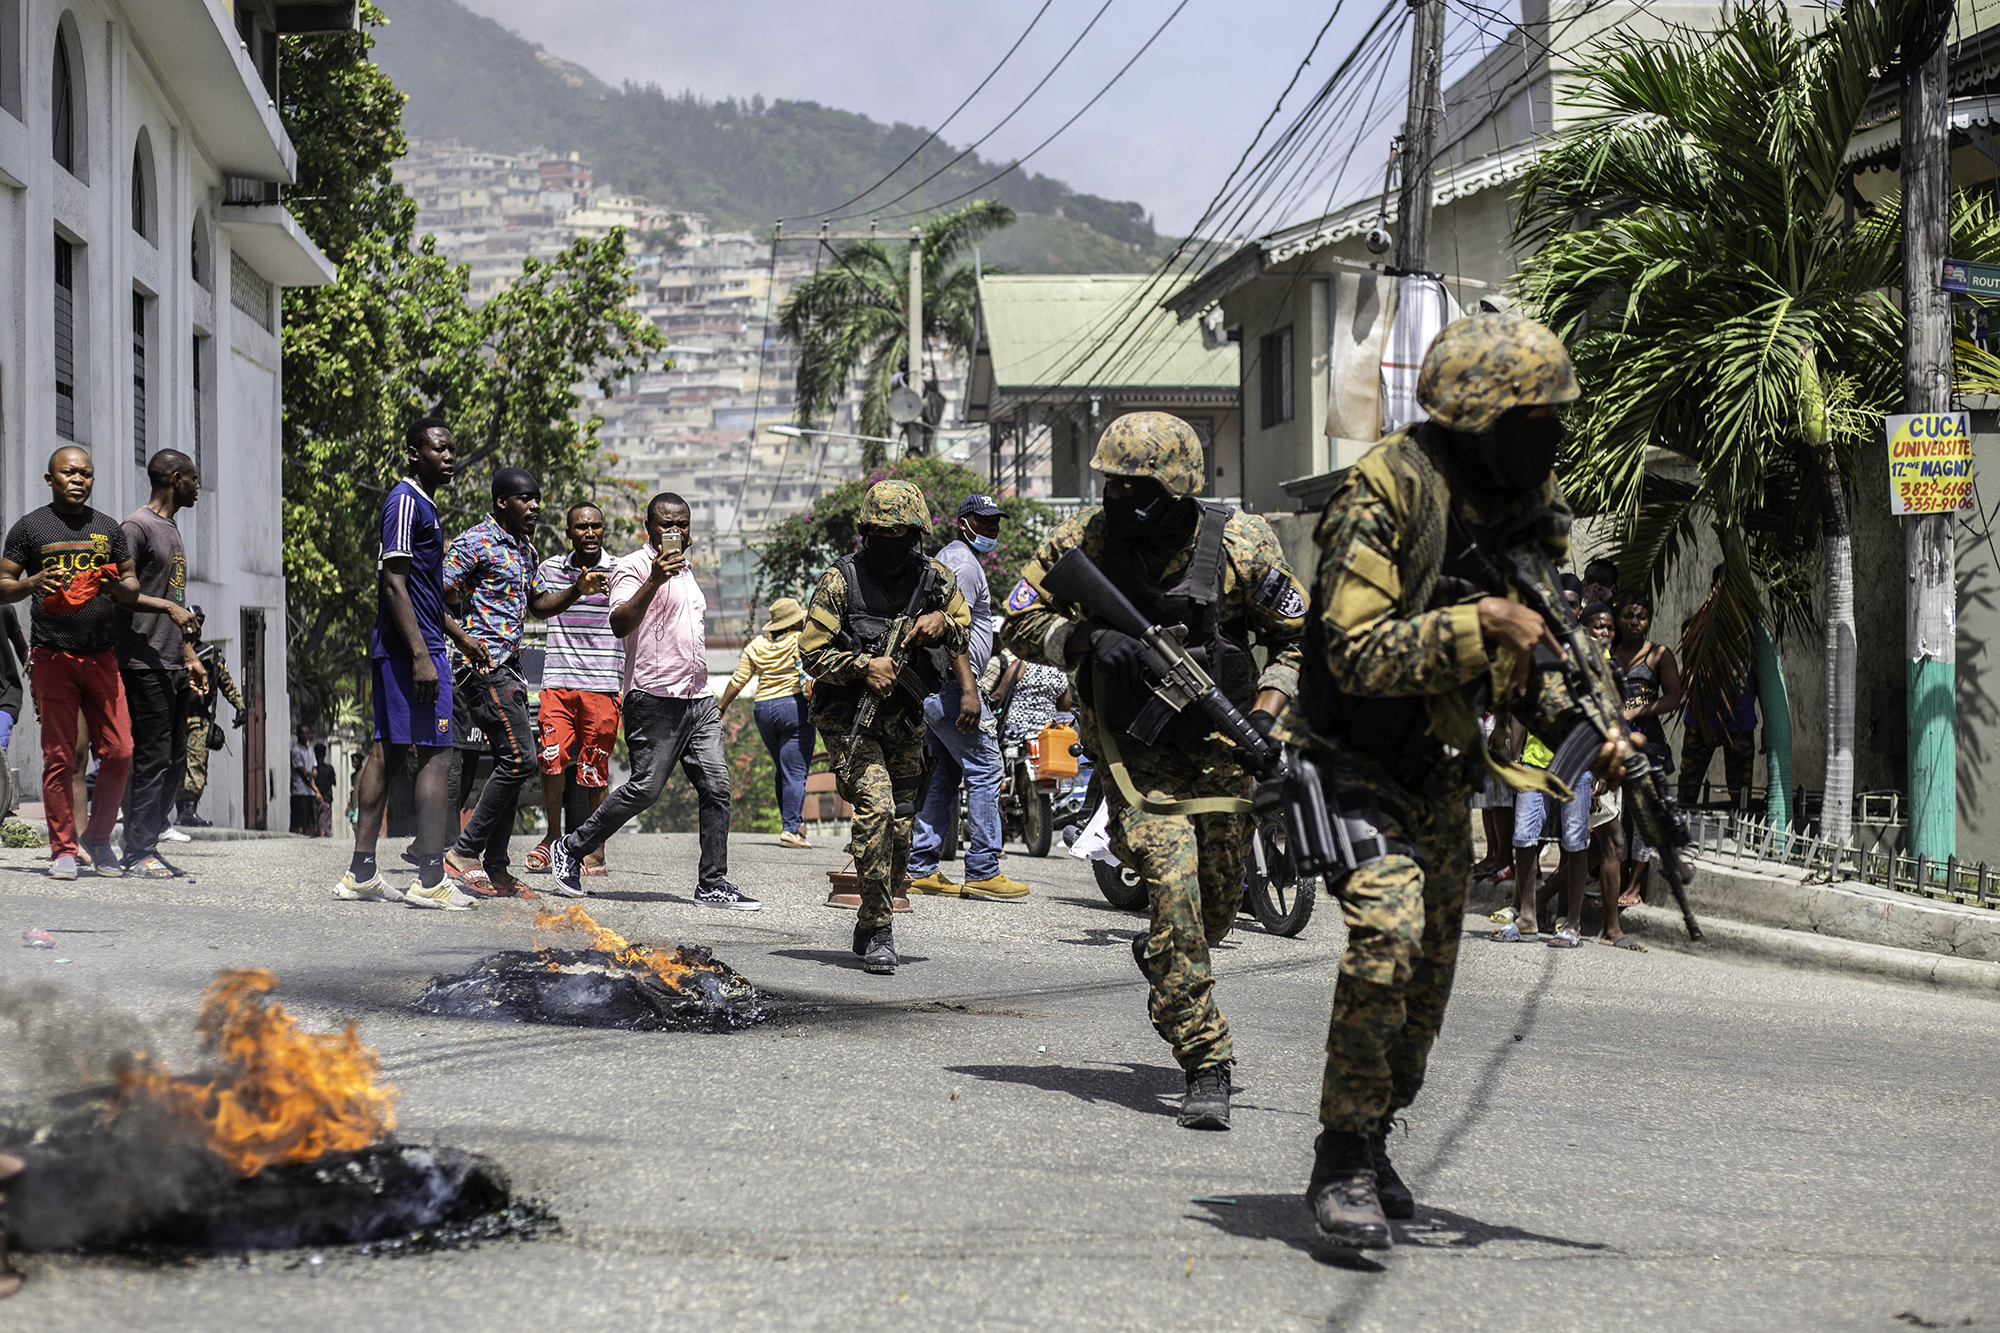 Soldiers with guns while civilians look on and tires burn in the street.